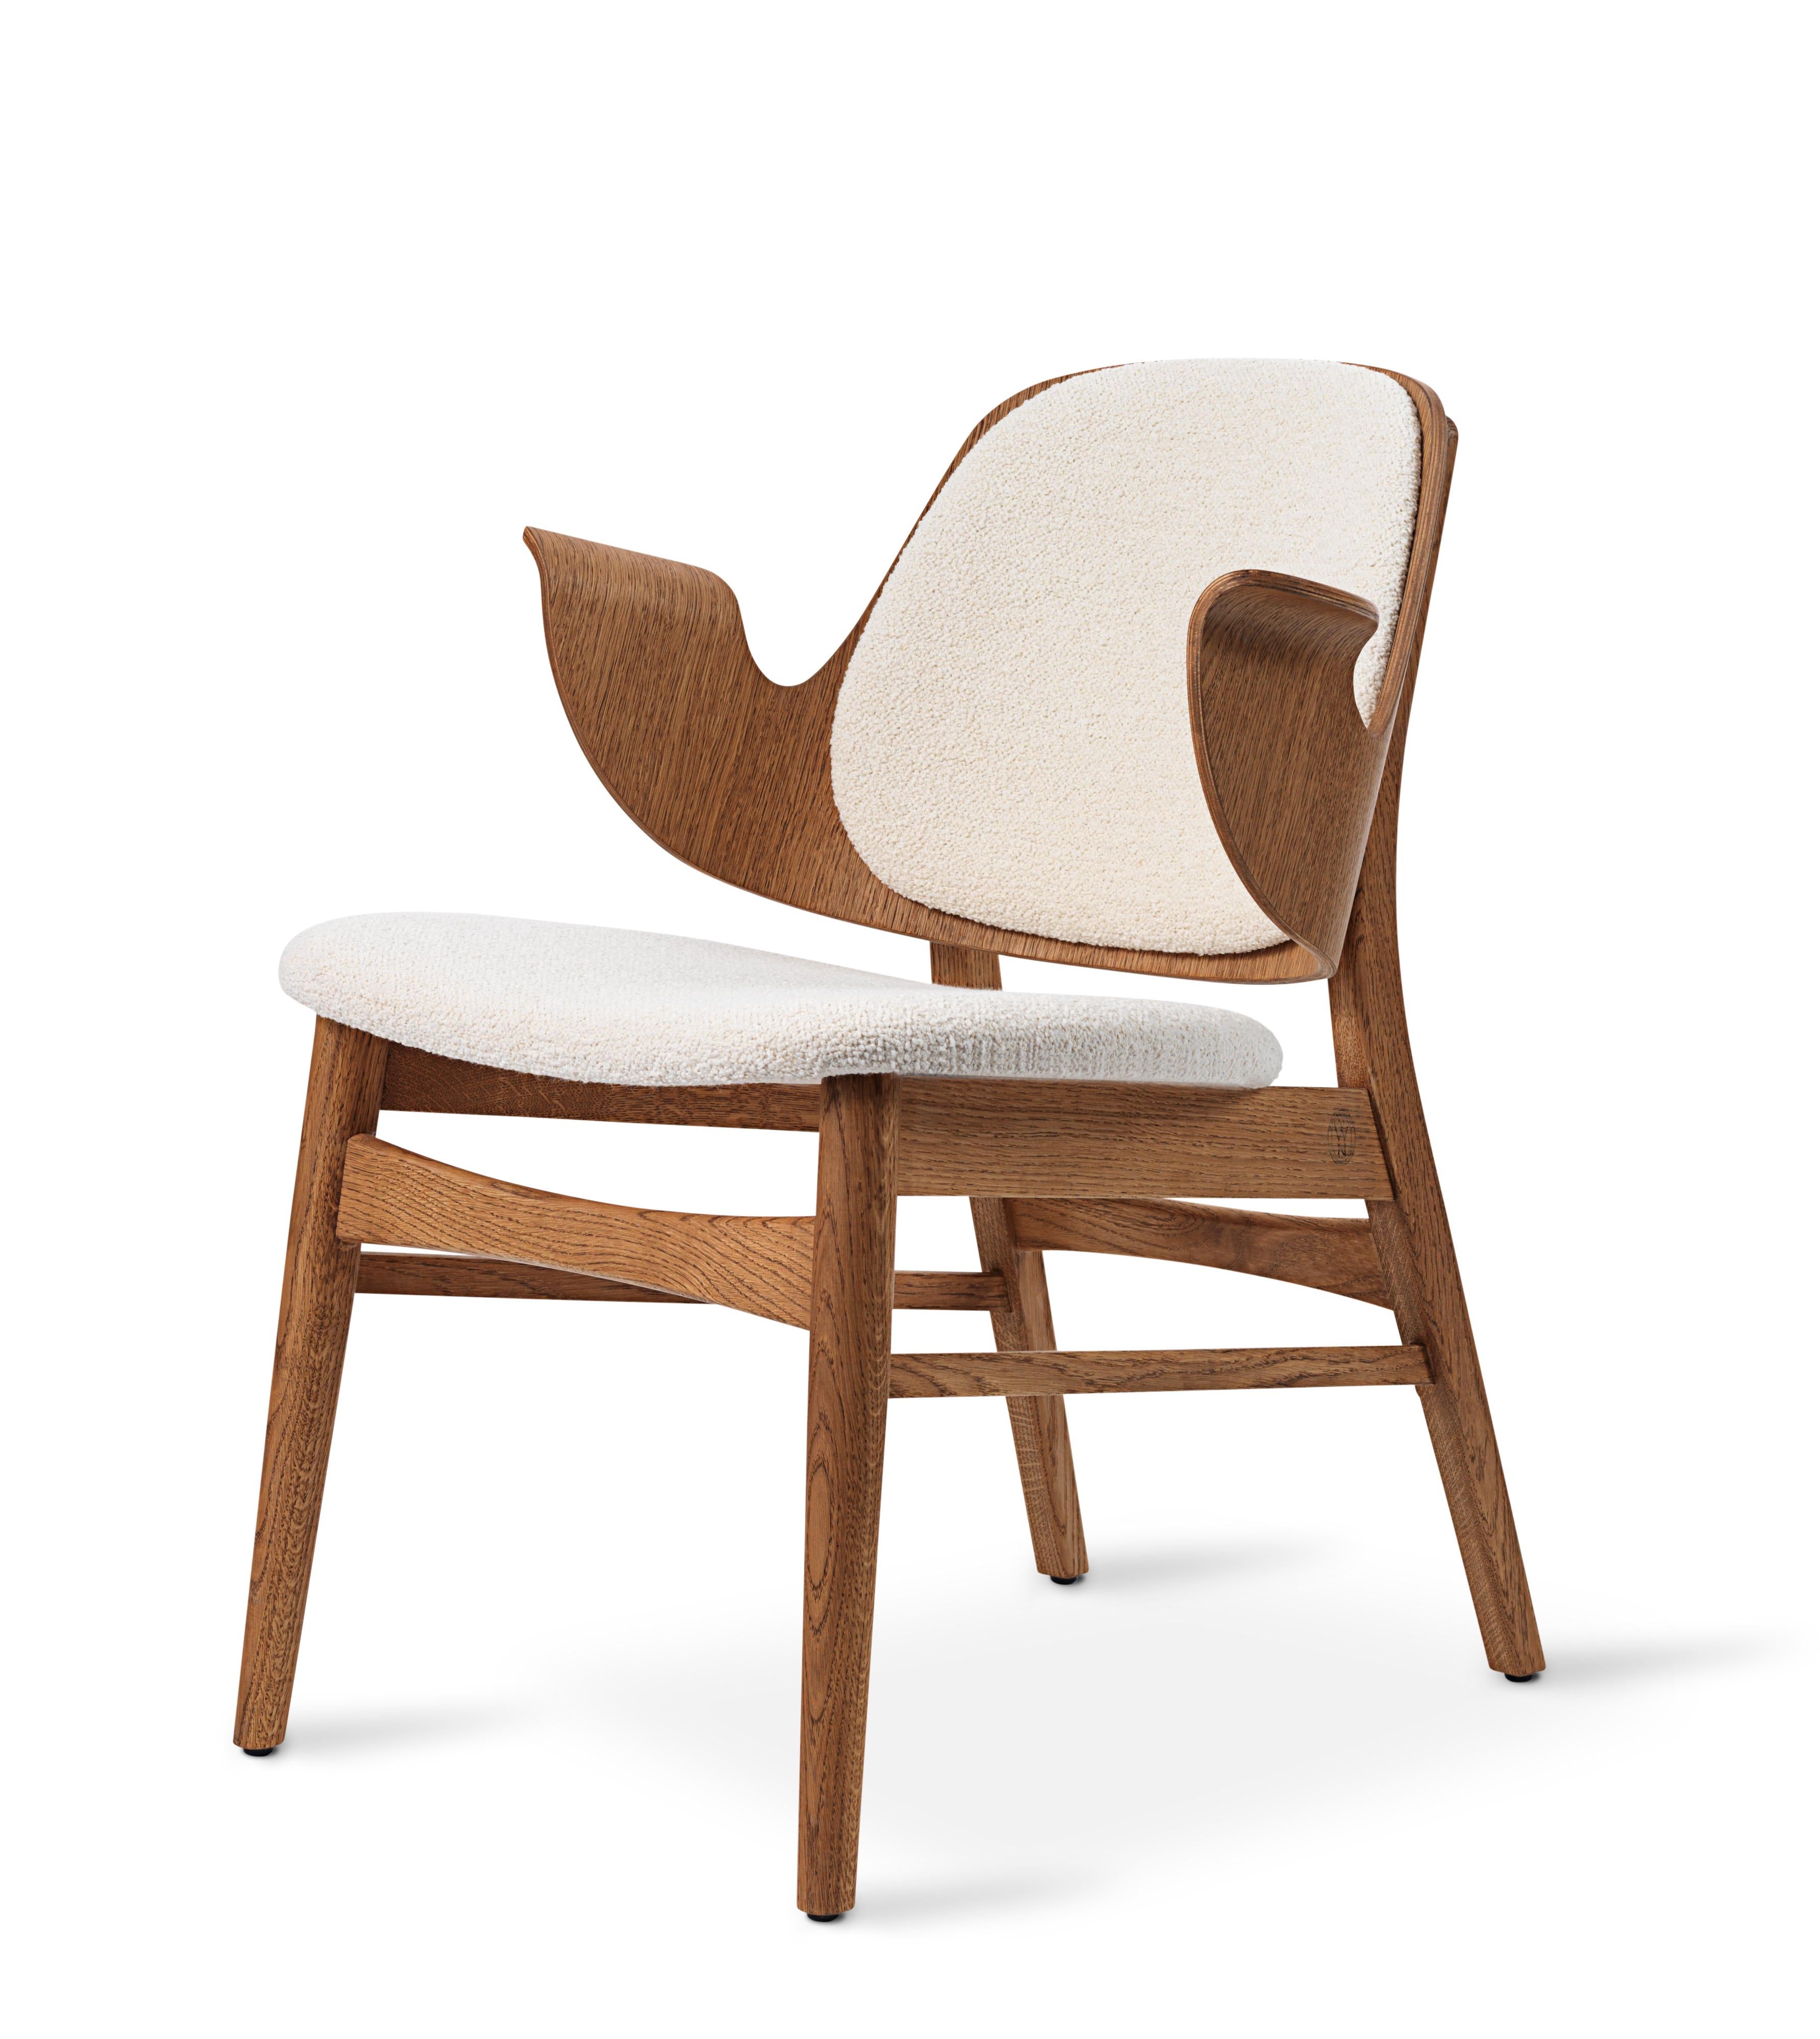 For Sale: White (Barnum 24) Warm Nordic Gesture Monochrome Fully Upholstered Lounge Chair in Teak Oak 2